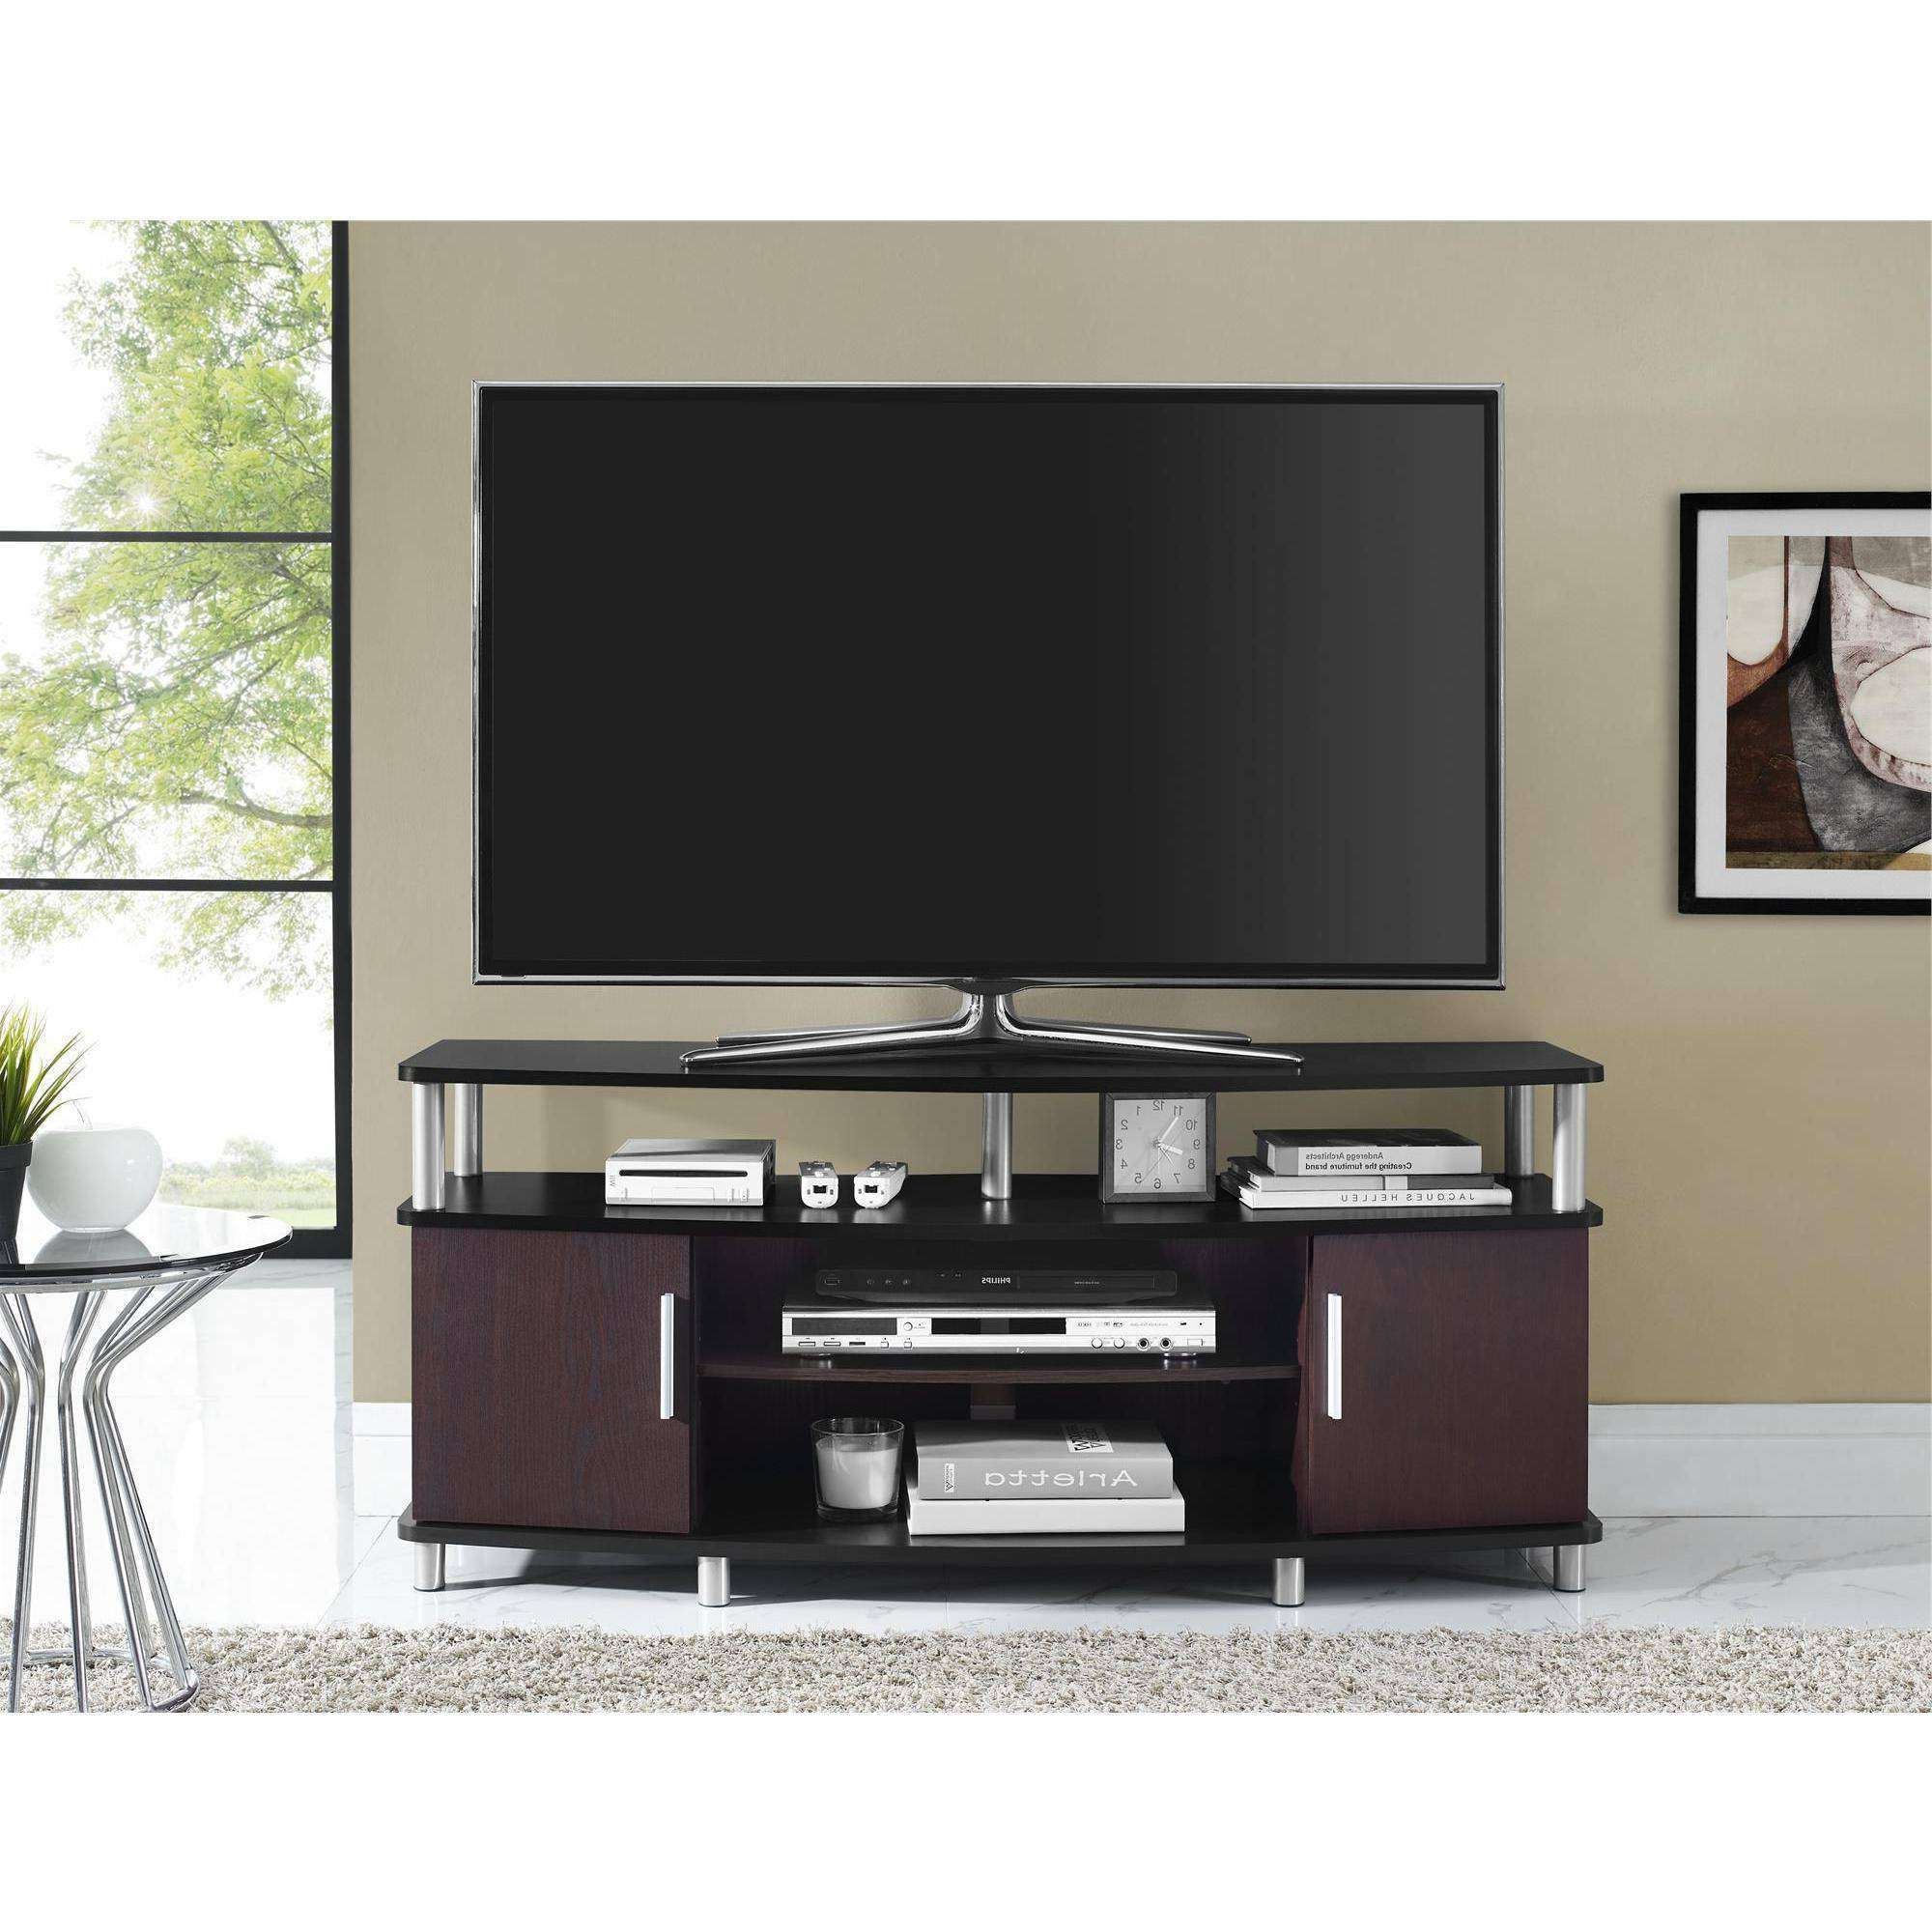 Tv Stand : 41 Unique Black Tv Stand For 50 Inch Tv Images Intended For 50 Inch Corner Tv Cabinets (View 13 of 20)